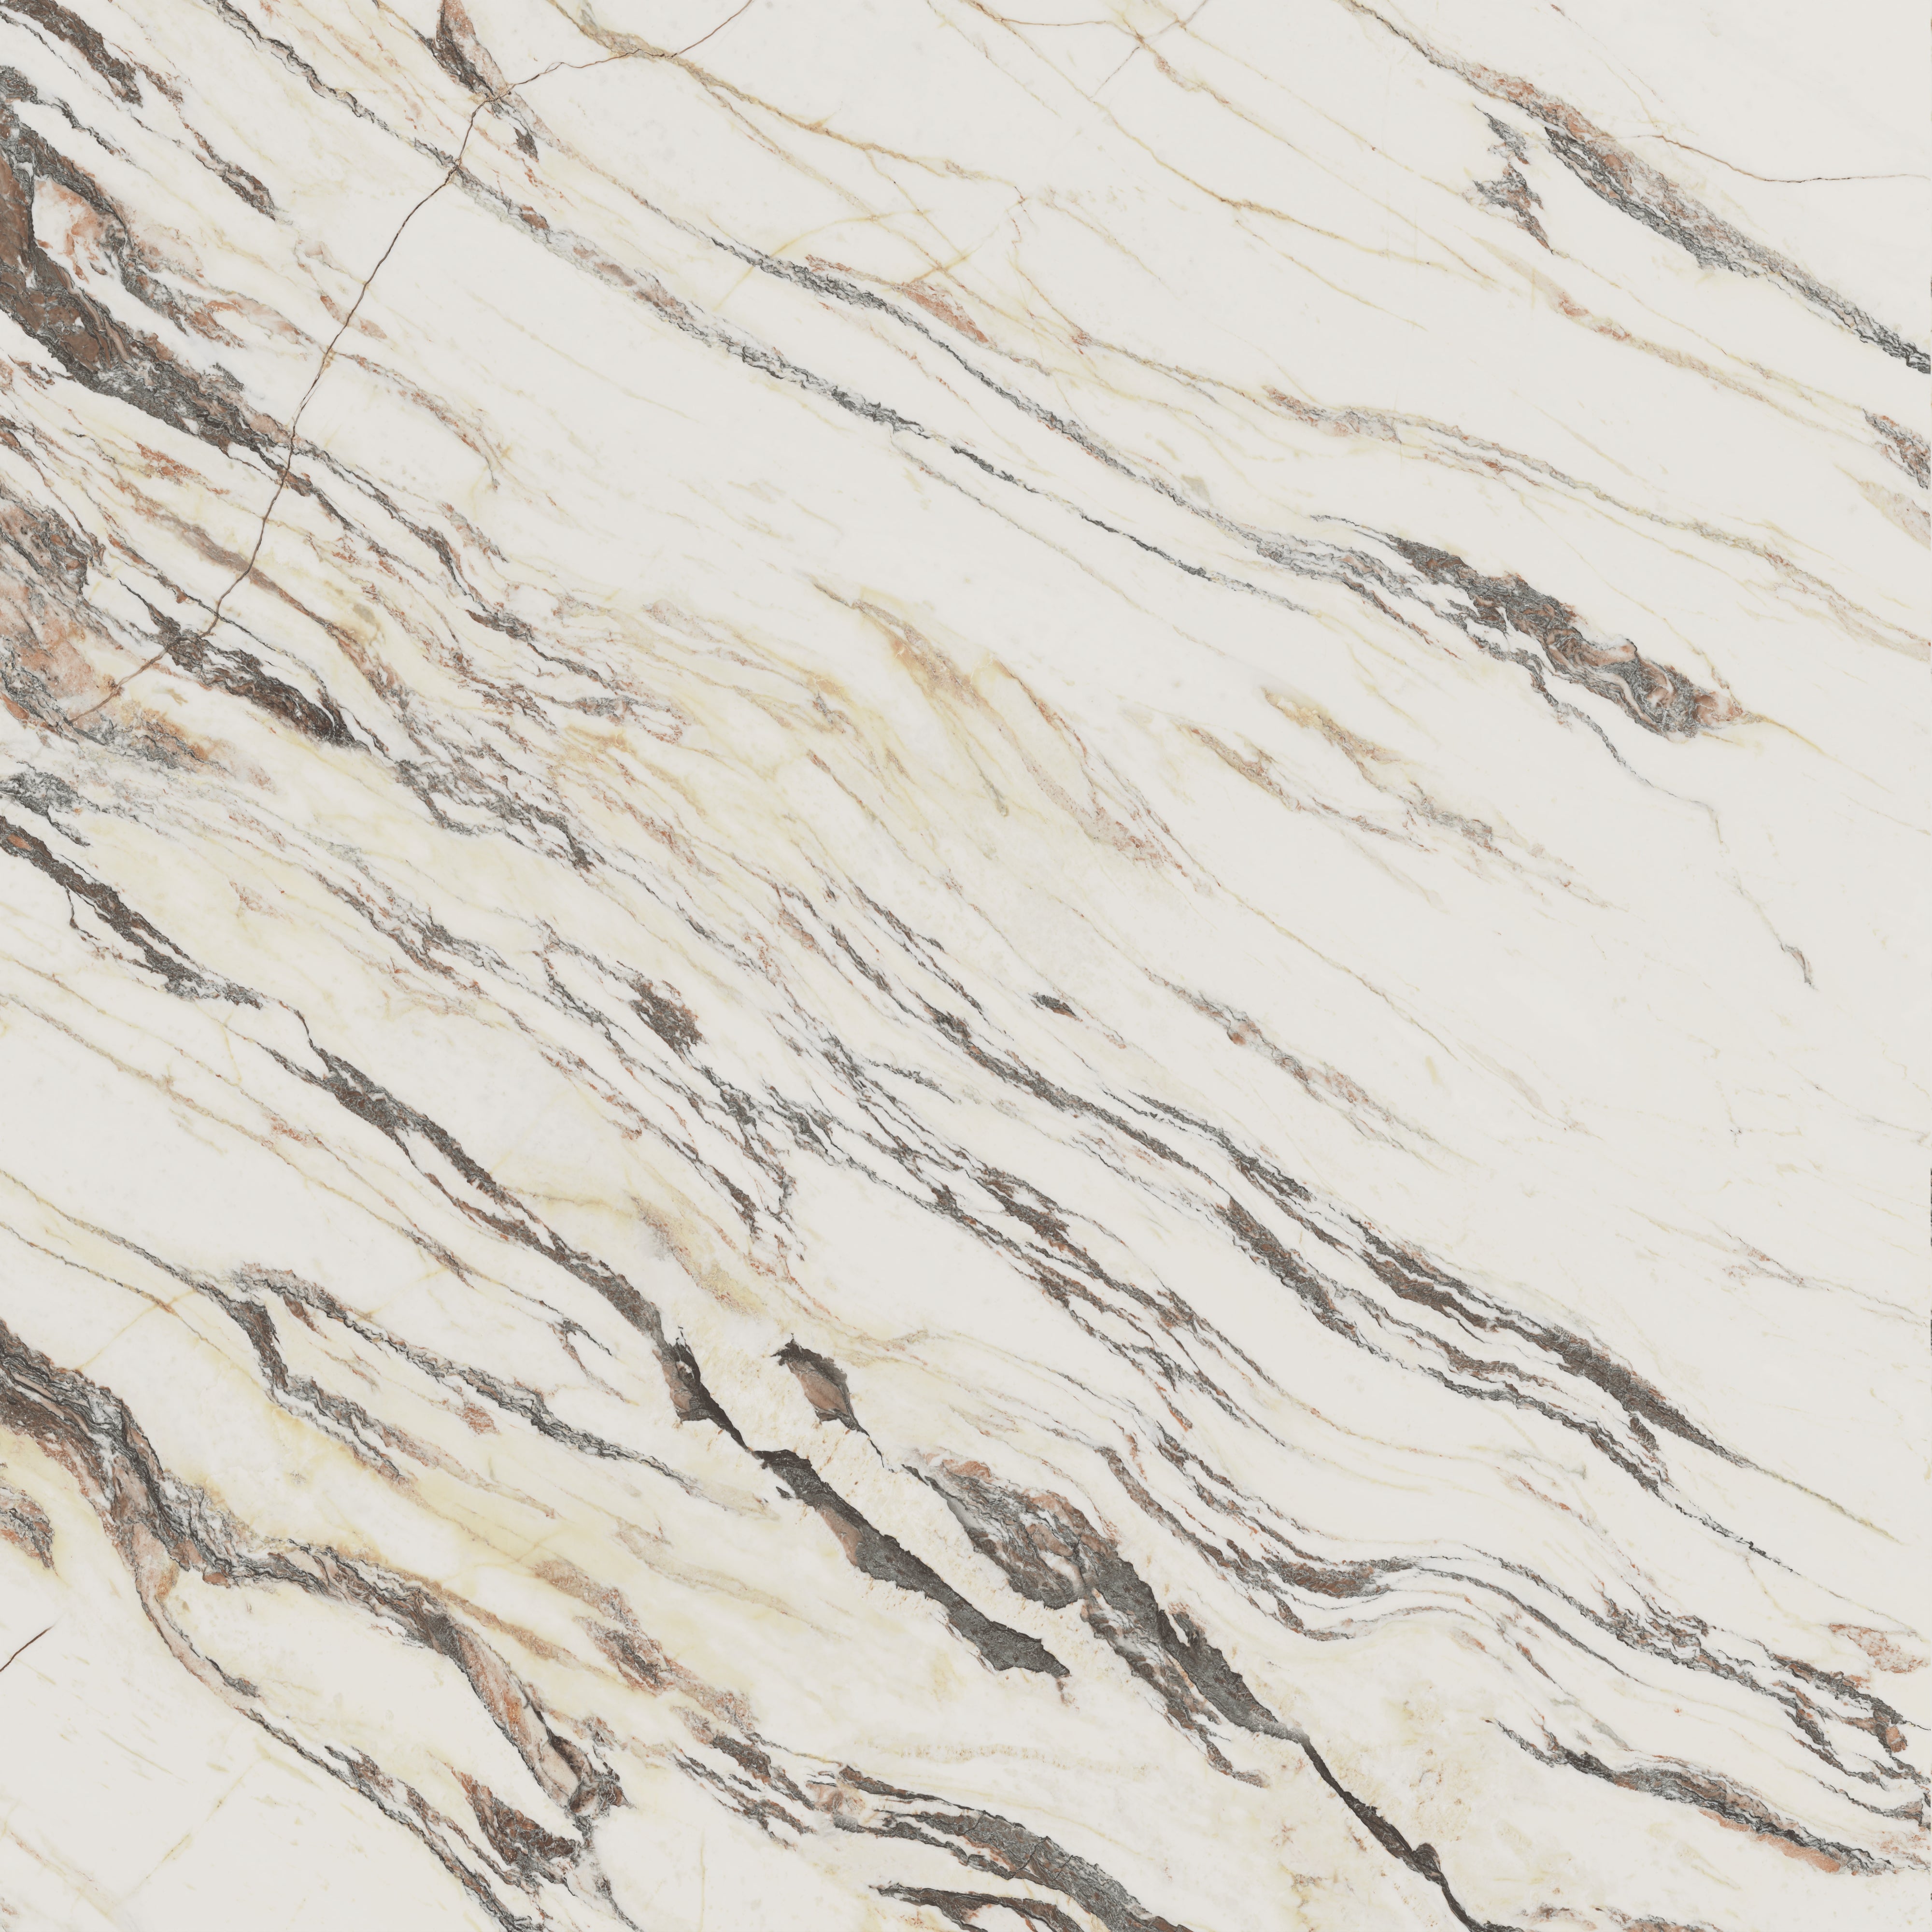 Aniston Calacatta Viola Marble-Look Porcelain Tile showcases rustic, reddish veining against a luminous white background, offering a unique and captivating aesthetic.